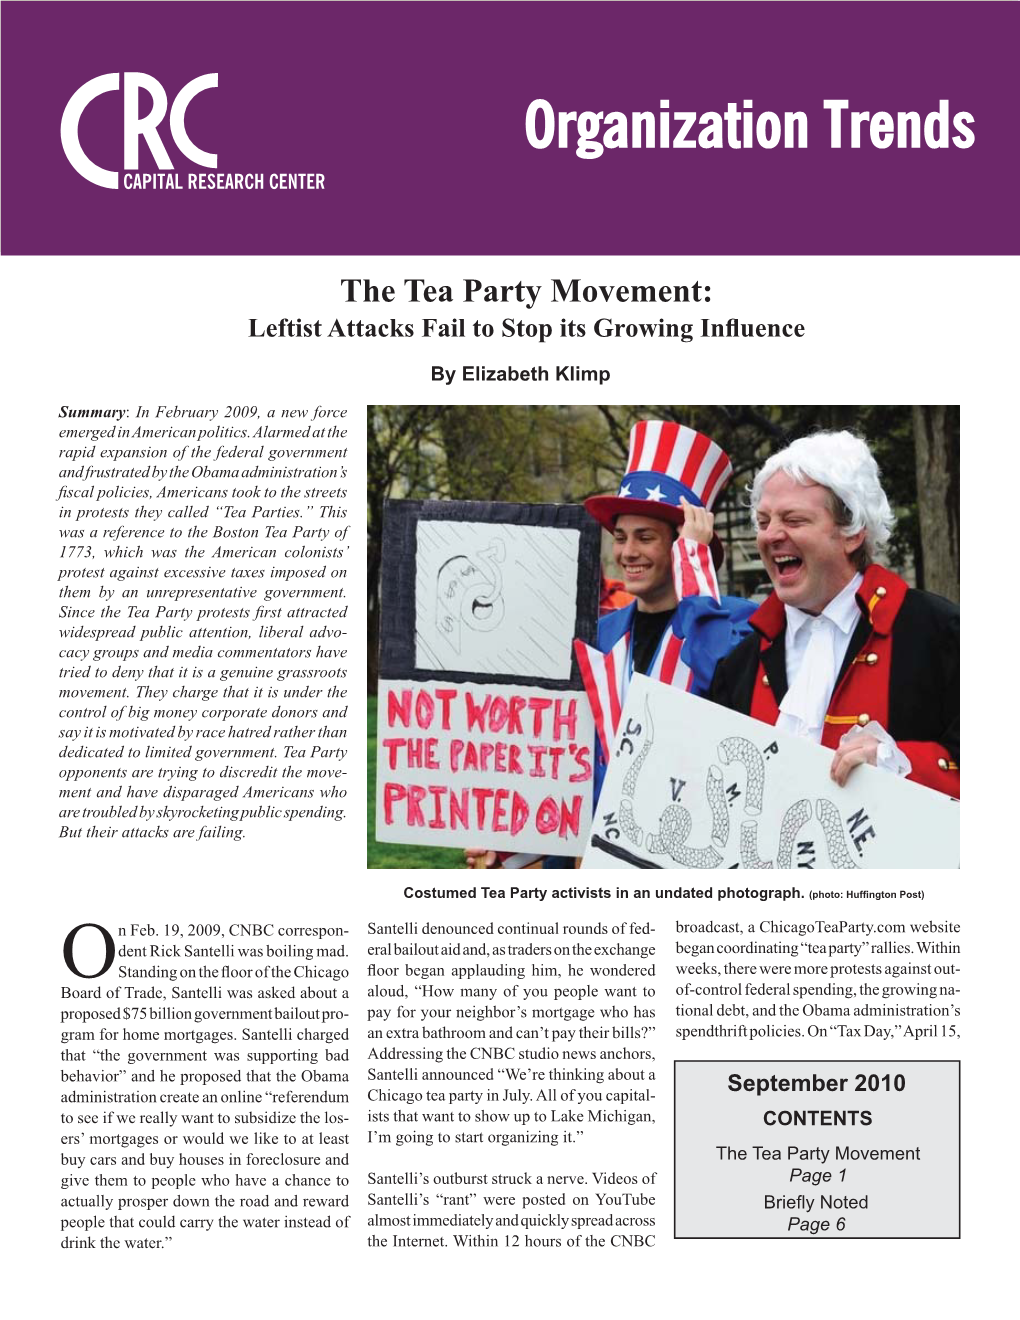 The Tea Party Movement: Leftist Attacks Fail to Stop Its Growing Inﬂ Uence